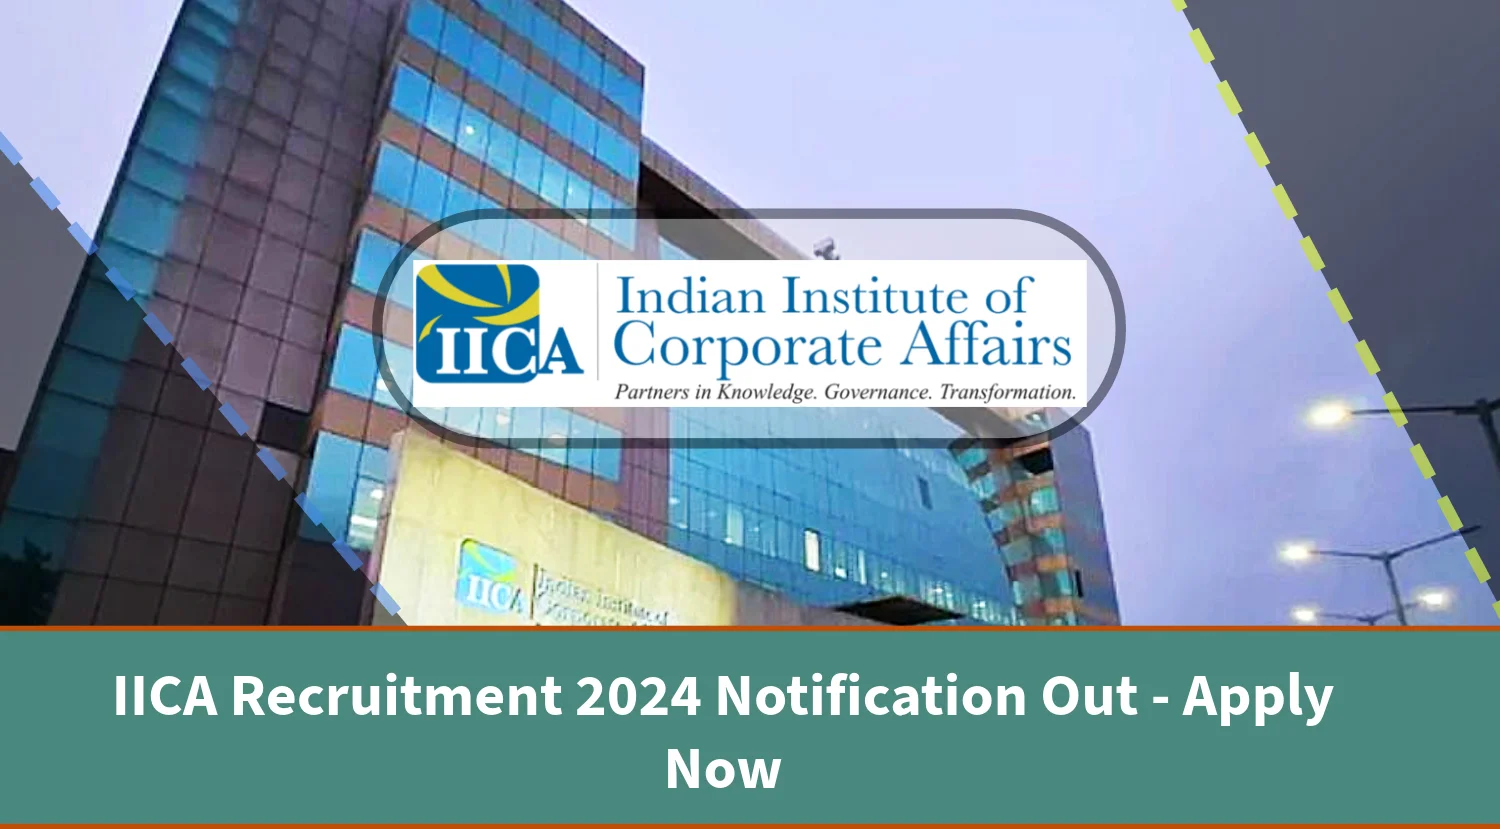 IICA Recruitment 2024 Notification Out